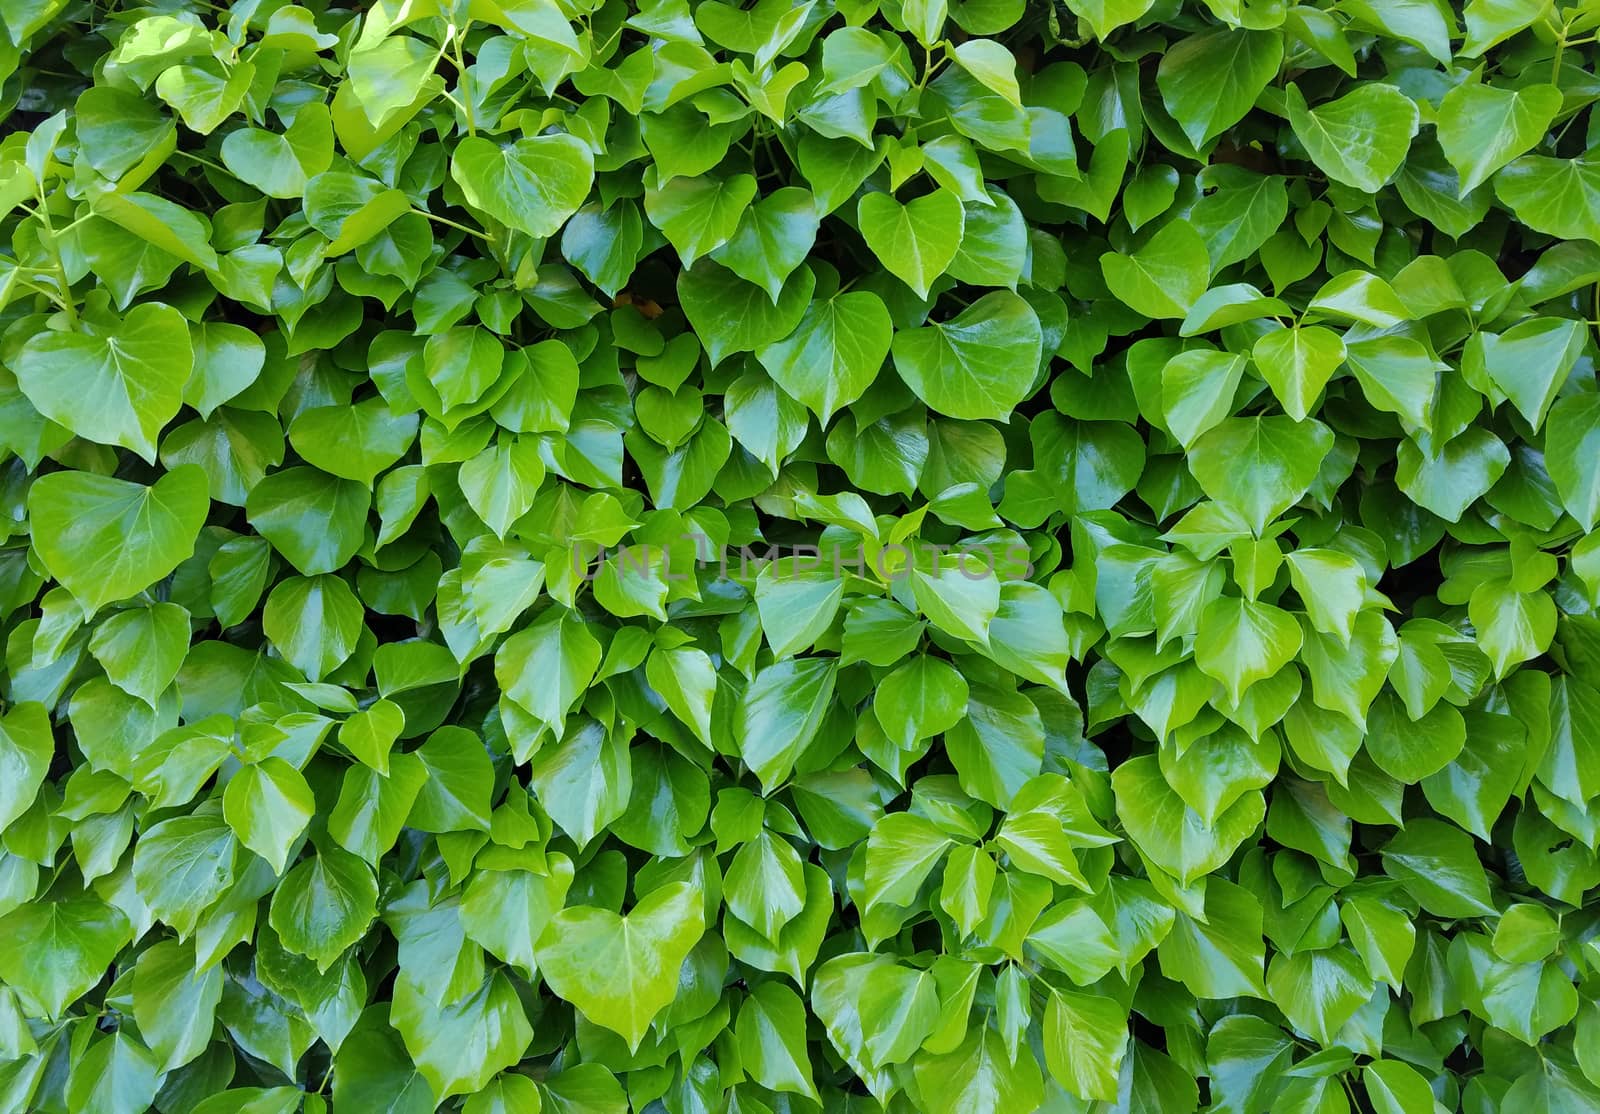 Background made of shiny green ivy leaves.